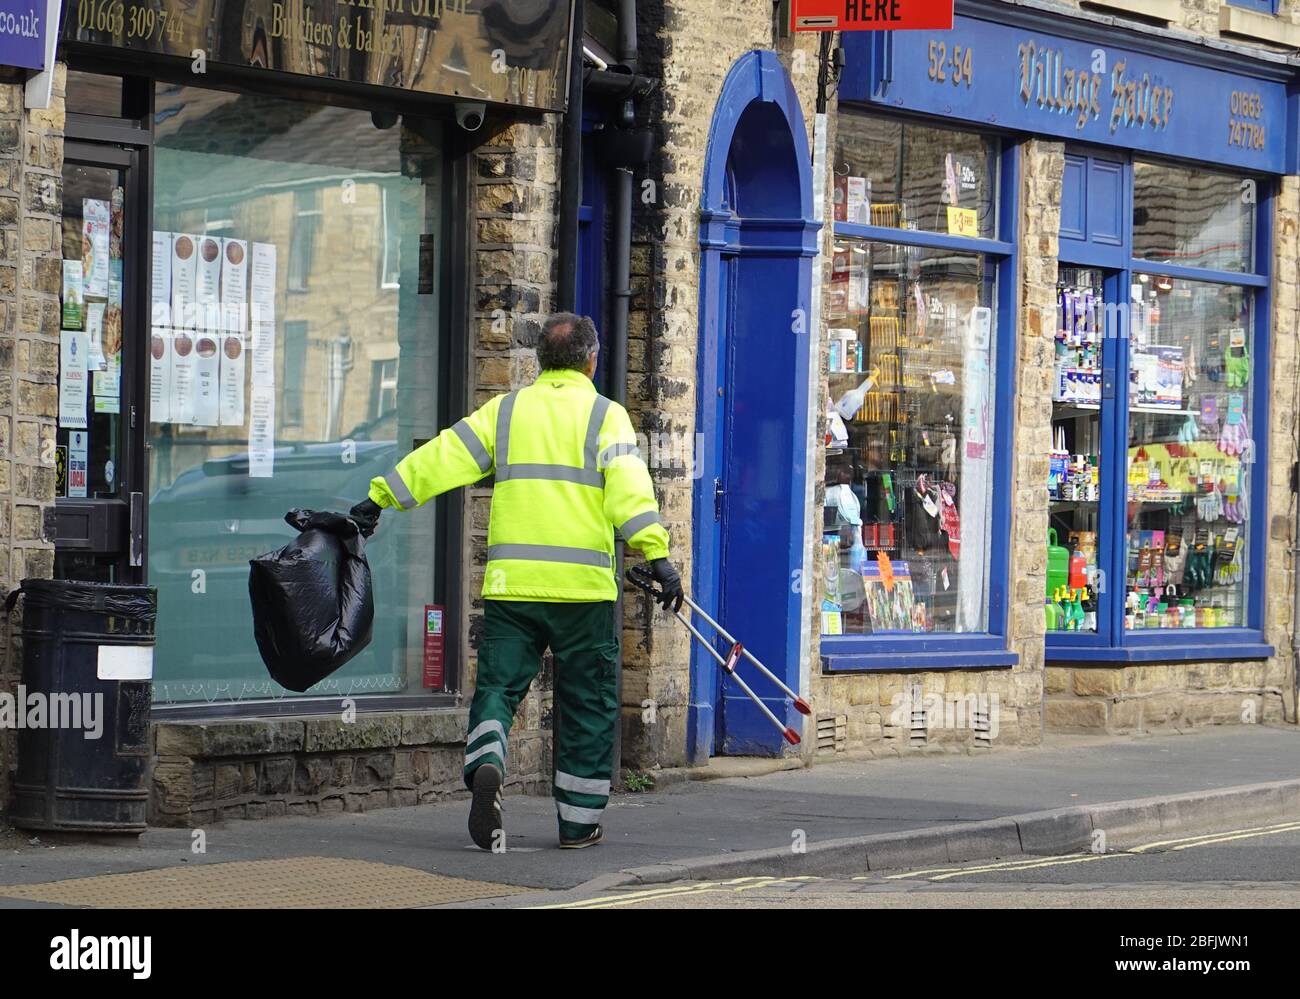 New Mills,  Derbyshire  April 19th 2020  Bin emptying  is one of local councils' responsibilities,  even during lockdown, due to the coronavirus pandemic. Stock Photo